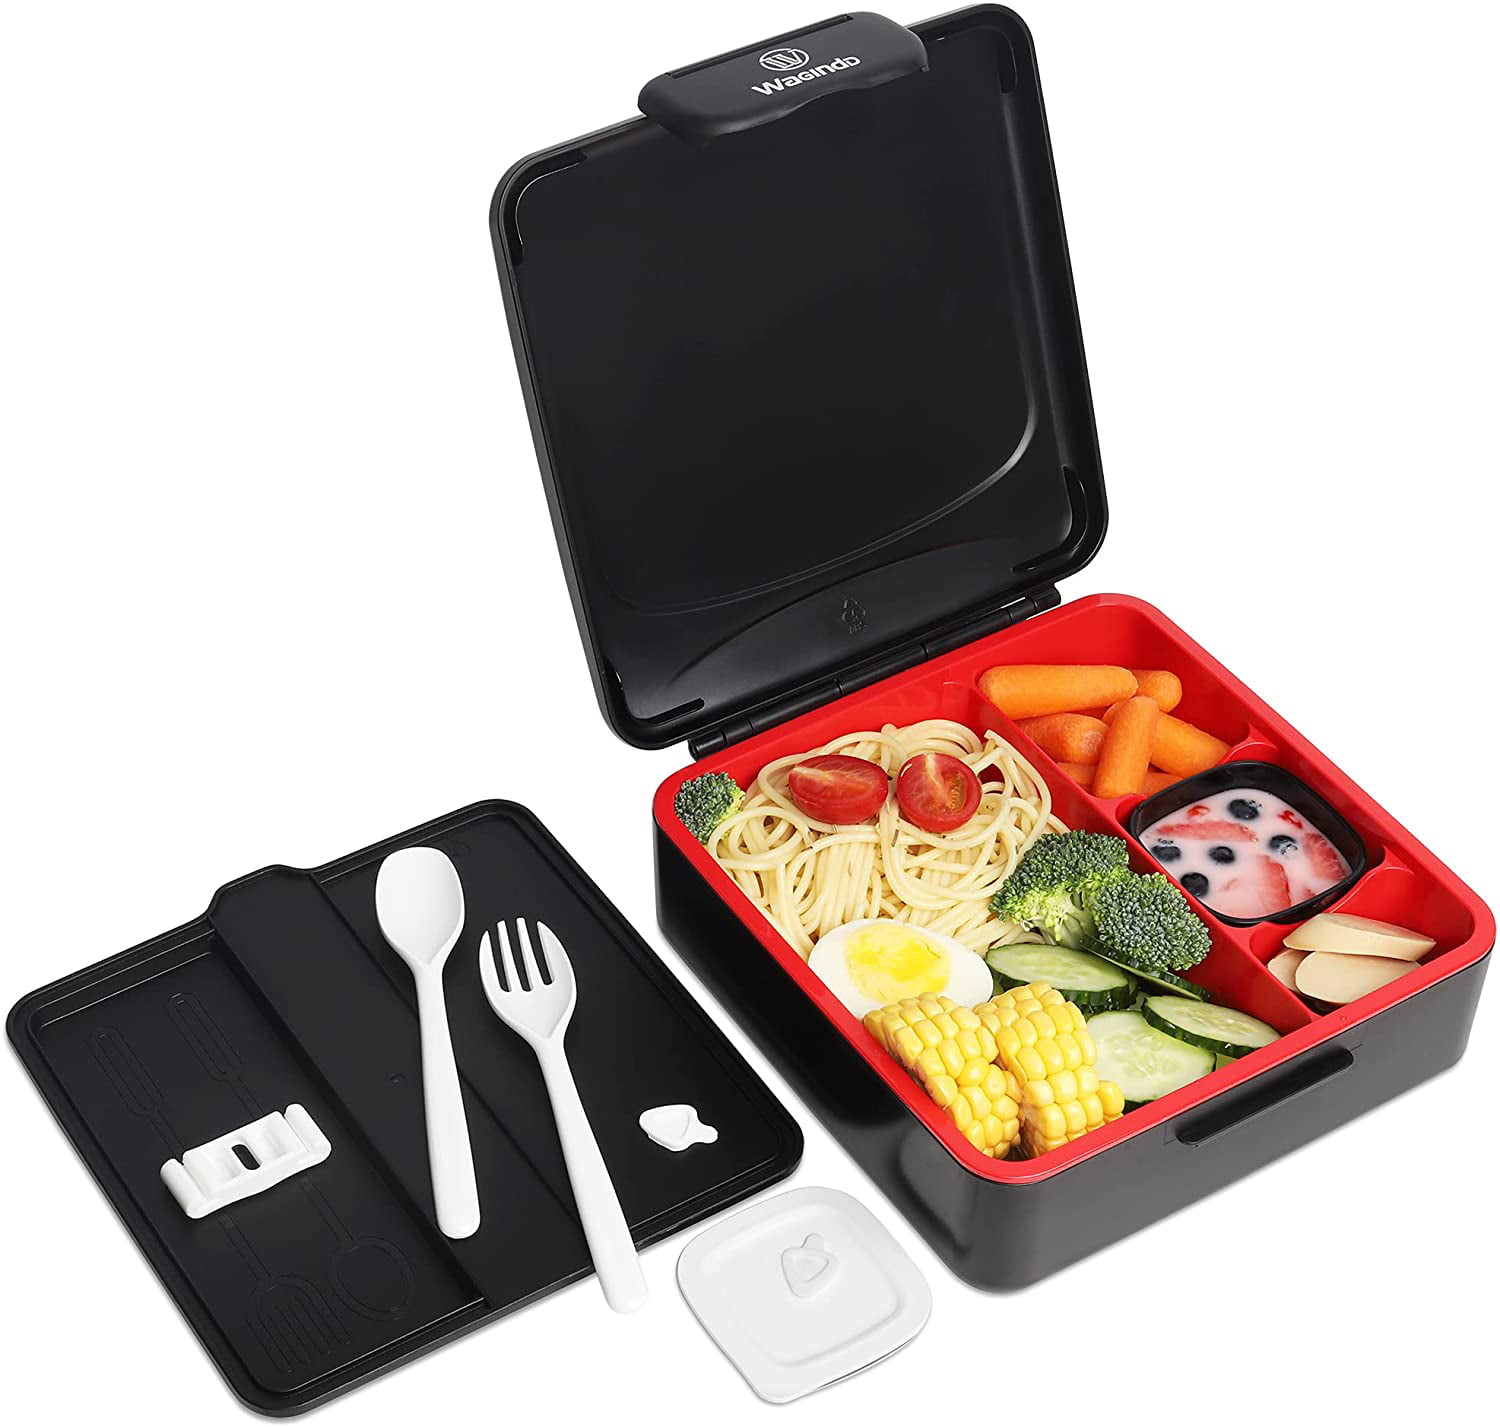 On-the-Go Meal and Snack Packing Green Leakproof lunchbox with utensils Edtsy Bento box for kids and adults with Dividers 1100 ml Lunch Solution Offers Durable Leak-Proof 